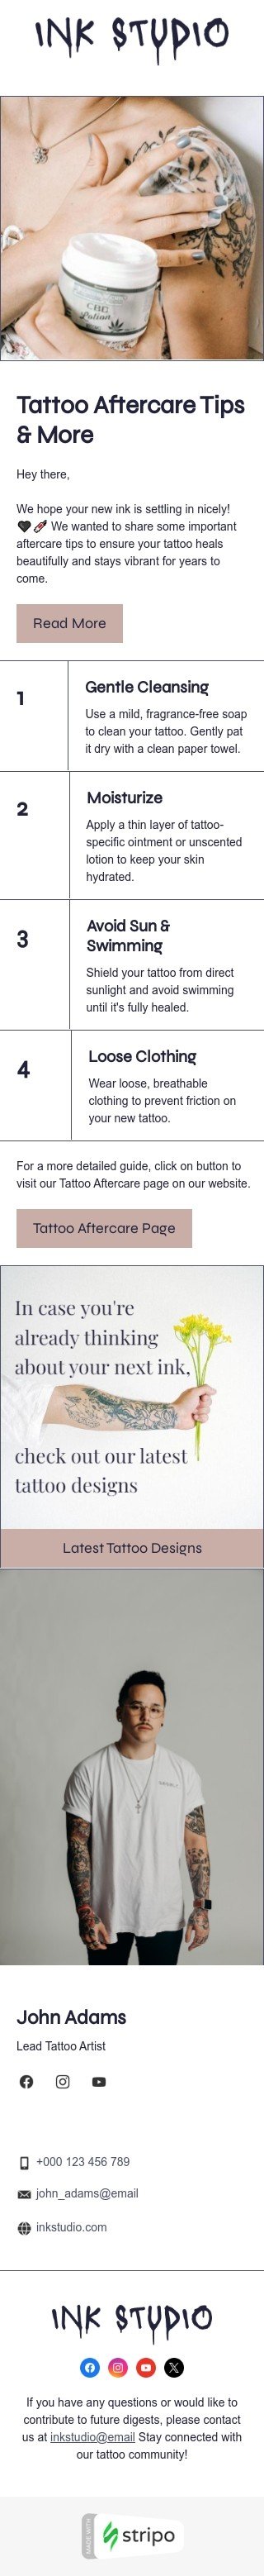 Newsletters email template "Tattoo aftercare tips & more" for tattoo industry mobile view